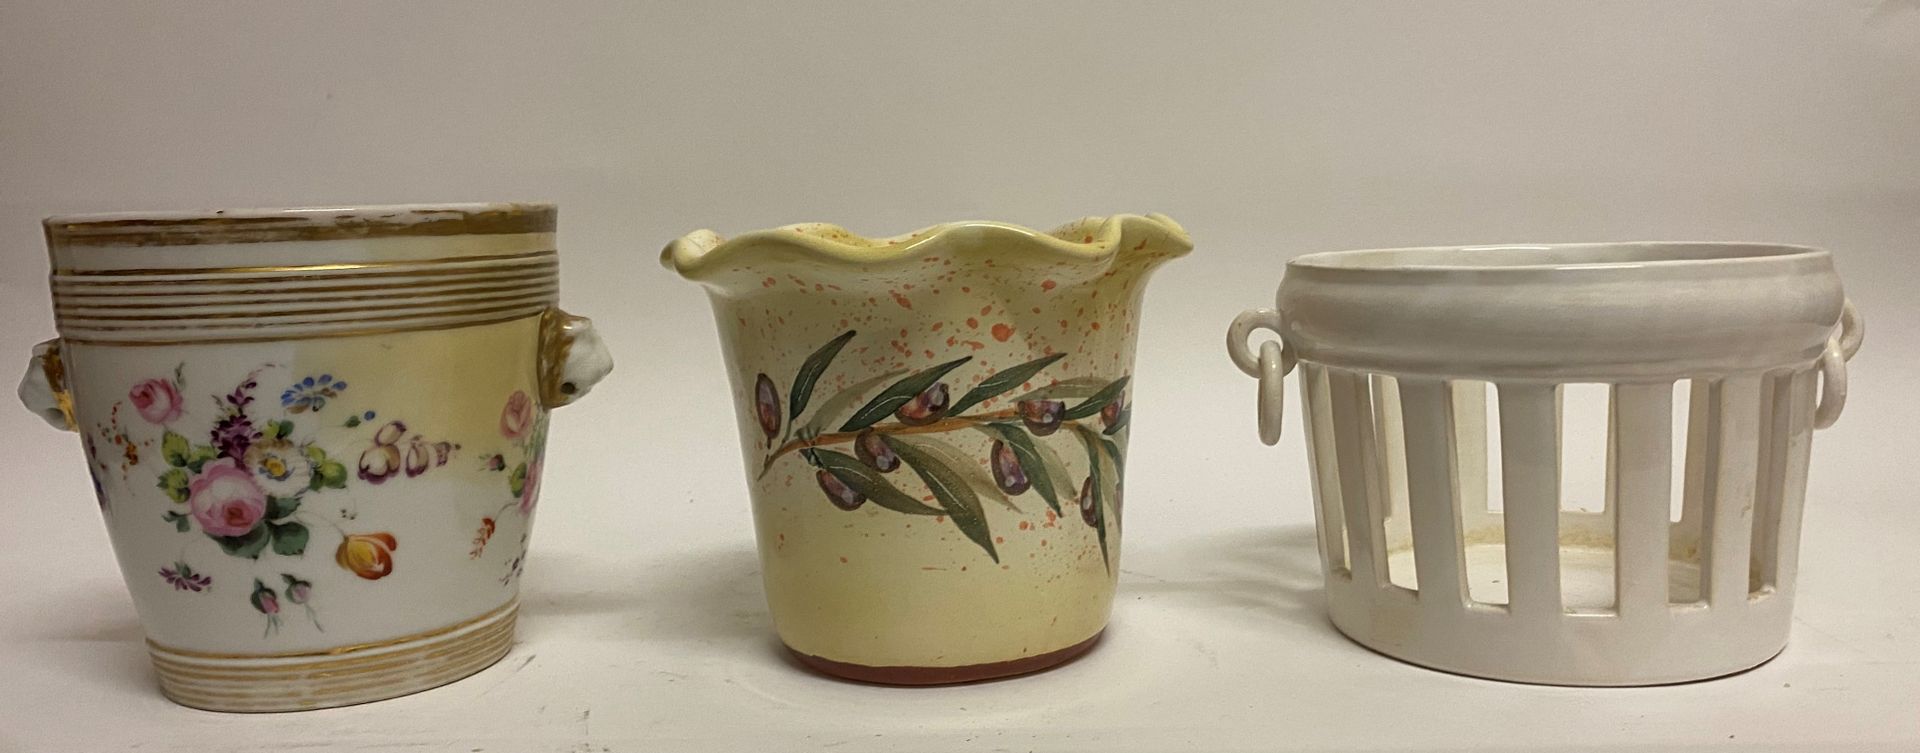 Null Earthenware set including 3 pots. Height. 11, 12 and 13 cm.